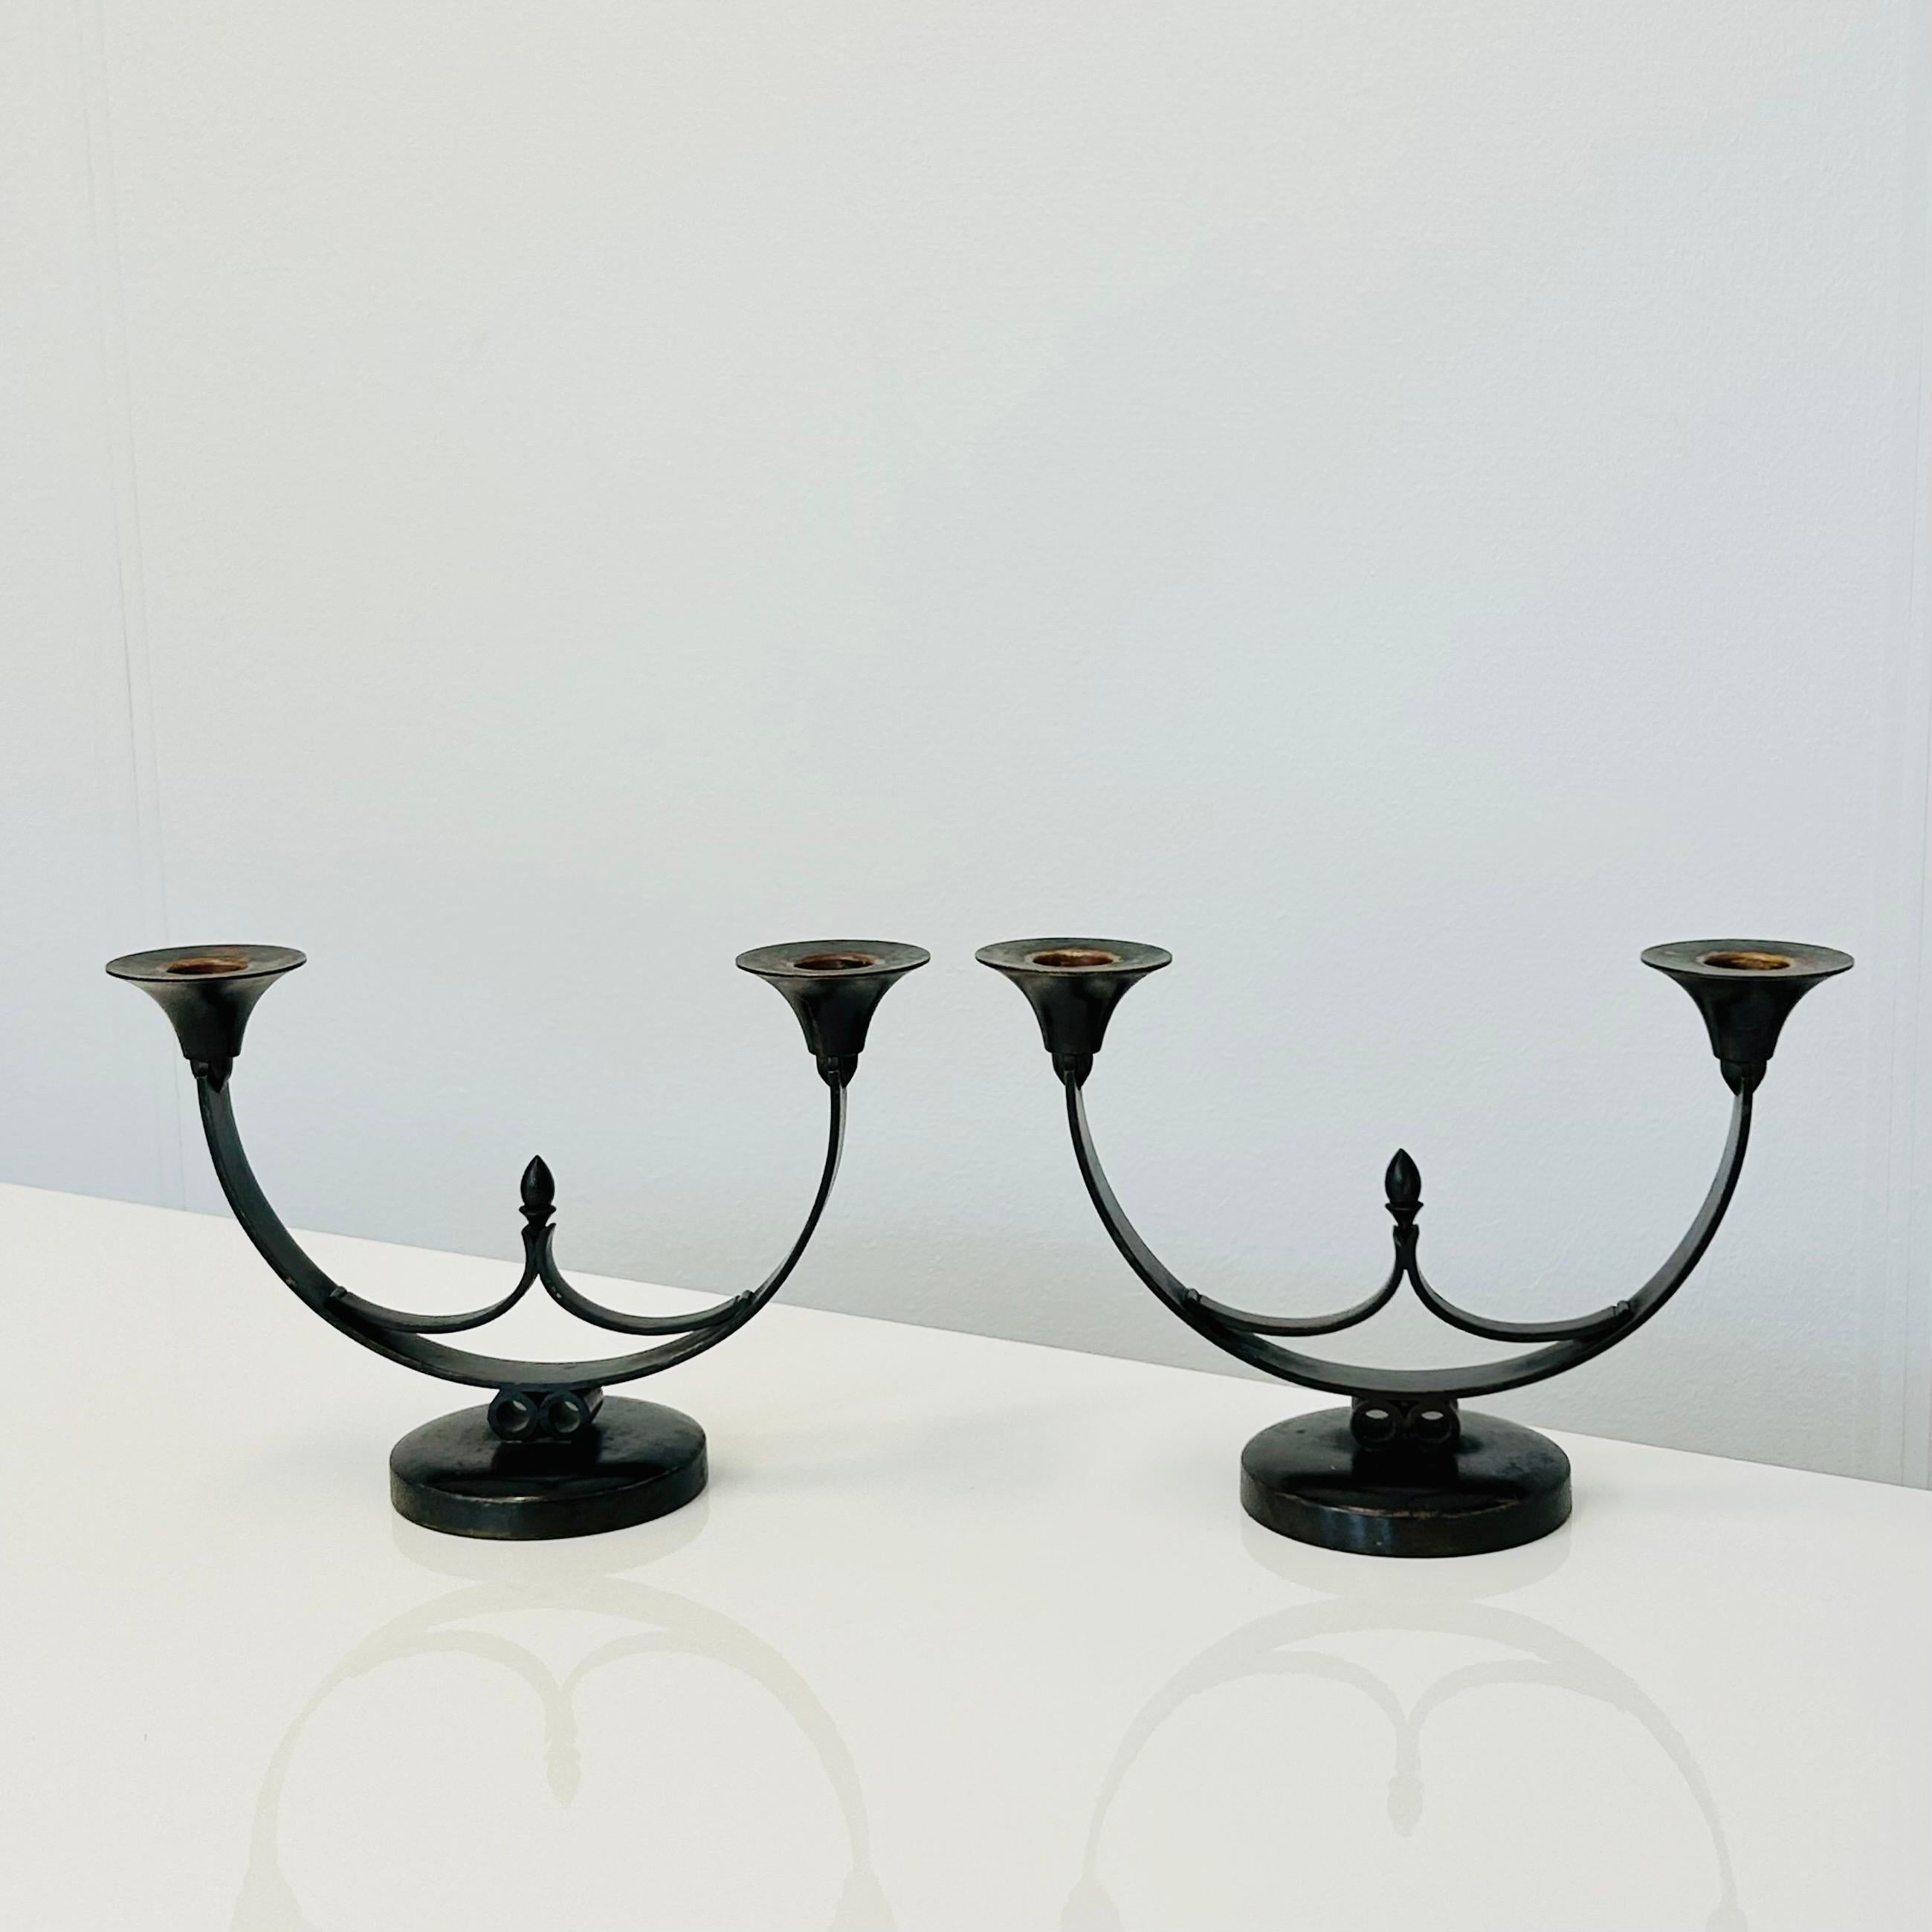 A remarkable pair of bronze candlestick holders designed by the renowned artist Just Andersen in the 1930s. These exquisite candlestick holders, model LB 1941, are a testament to Andersen's artistic brilliance. Their timeless design is sure to